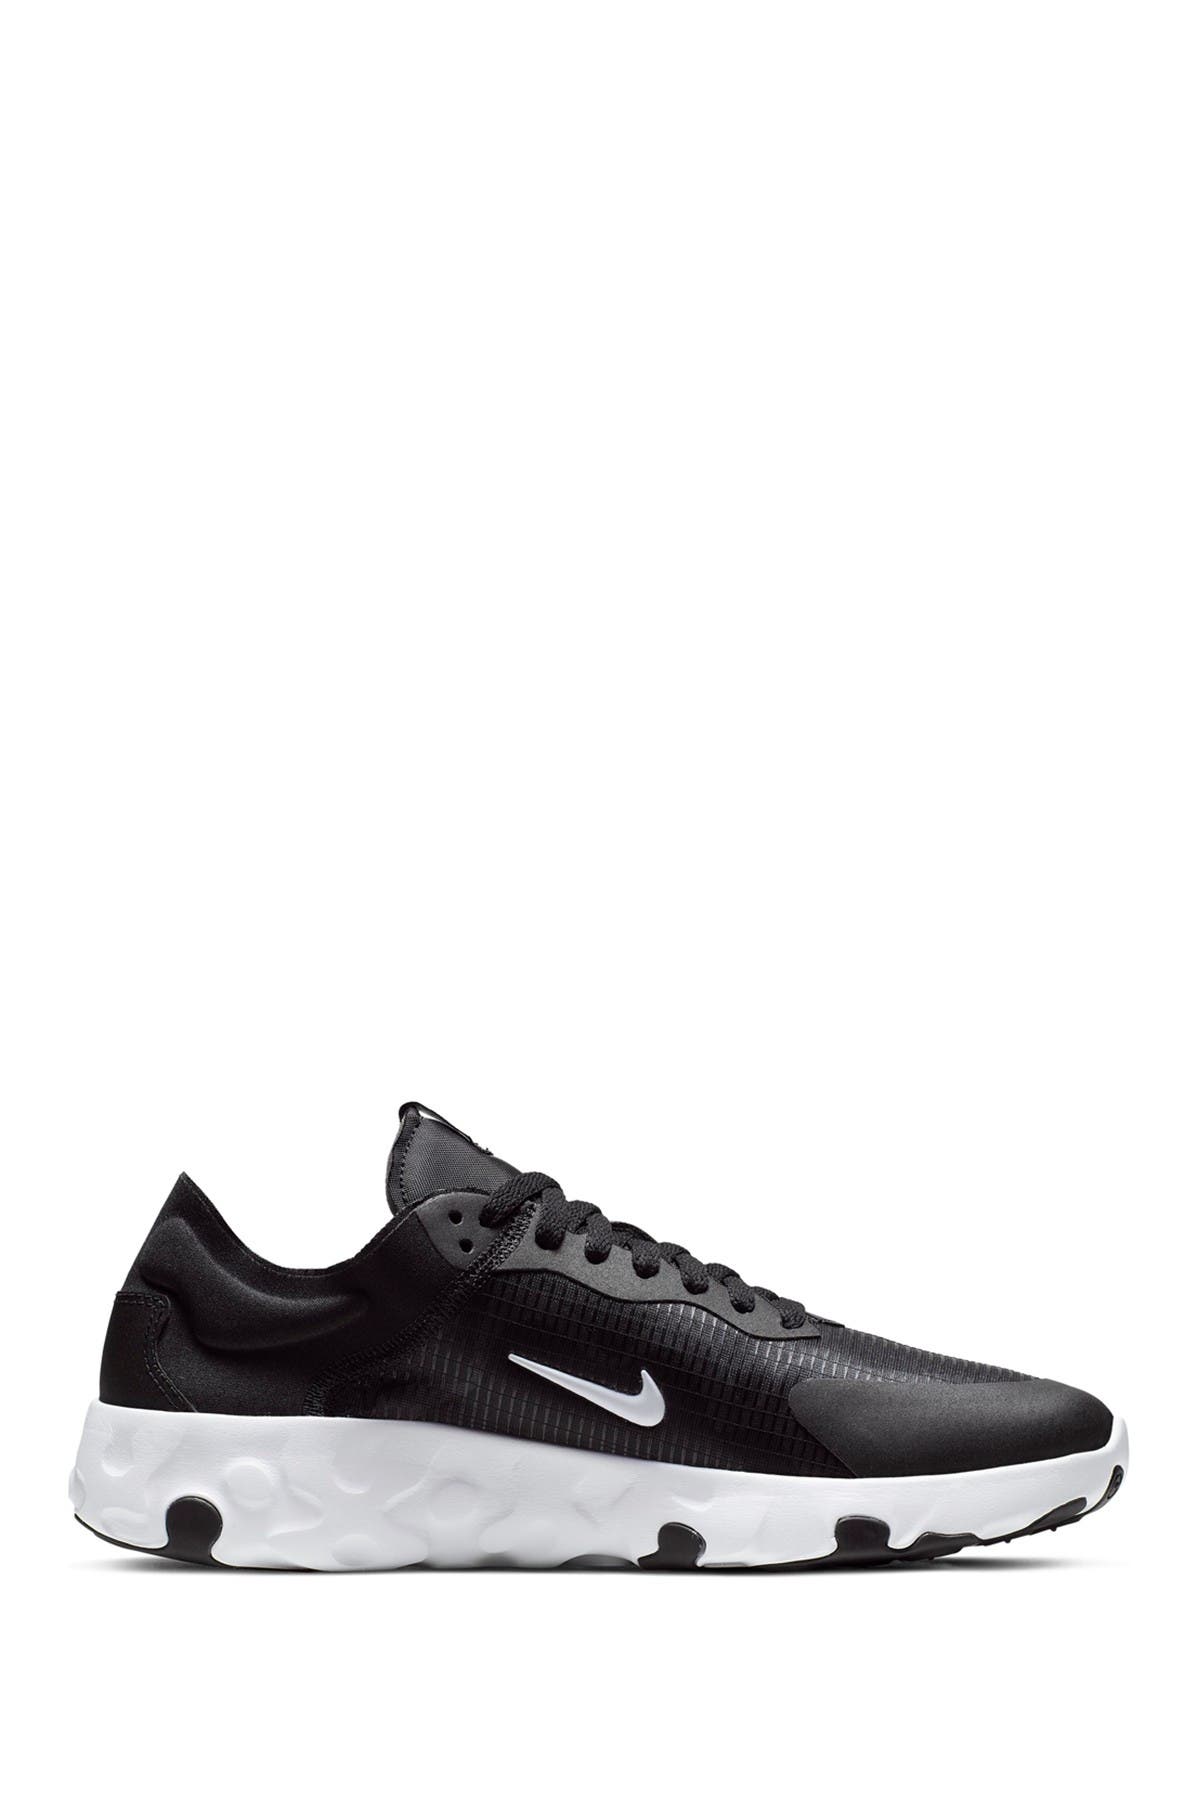 nike mens renew lucent